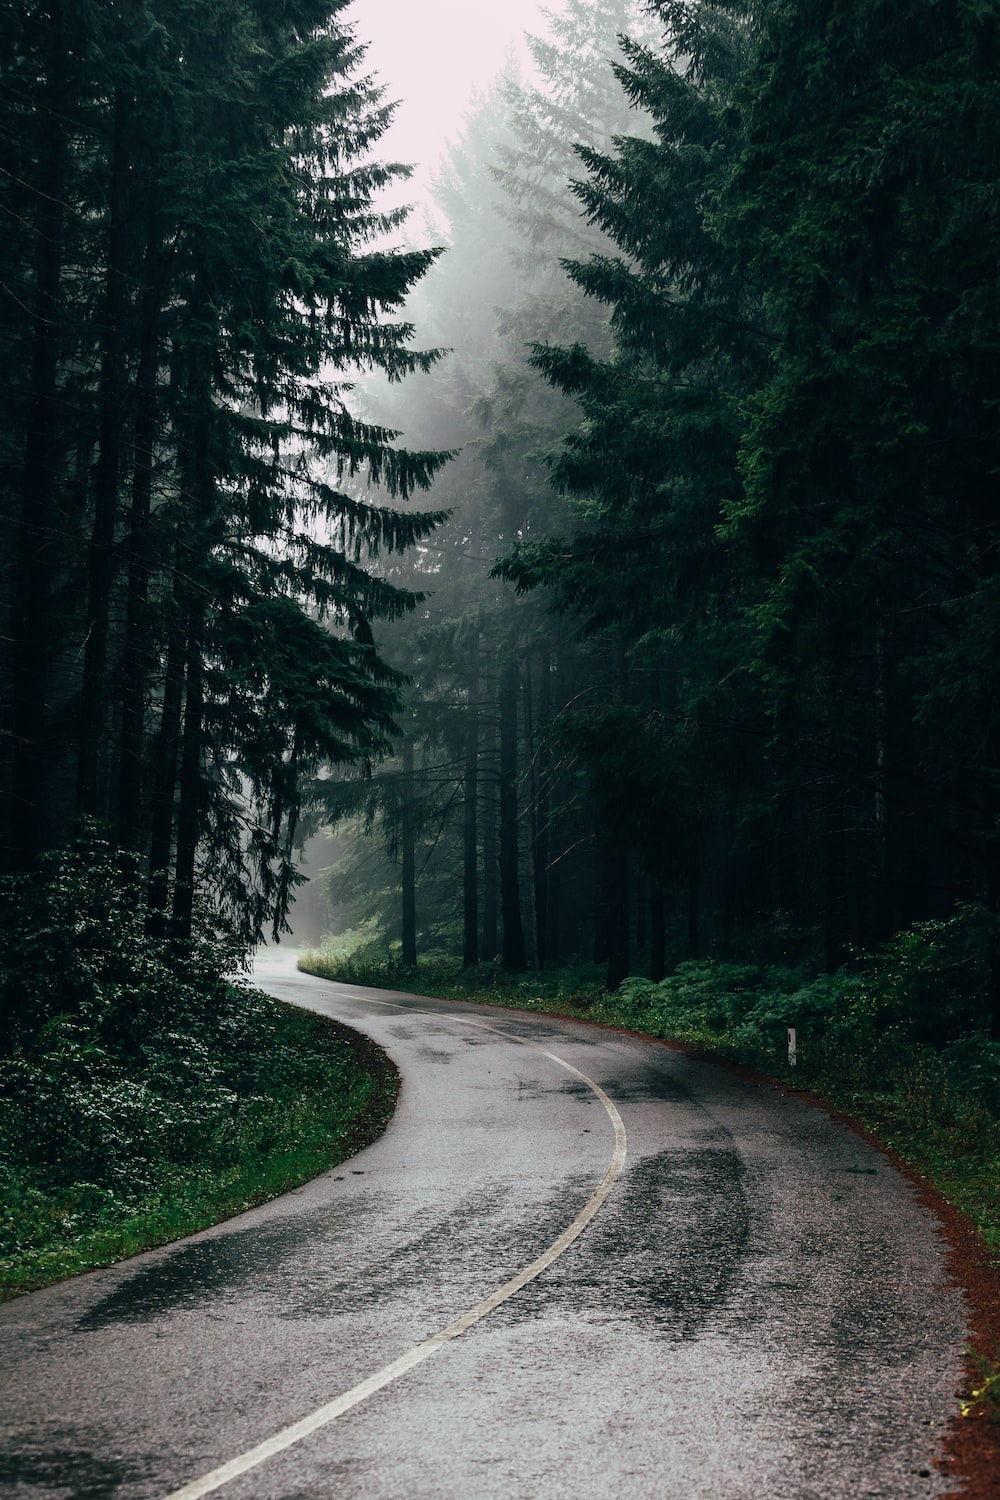 A wet, winding road surrounded by tall trees. - Nature